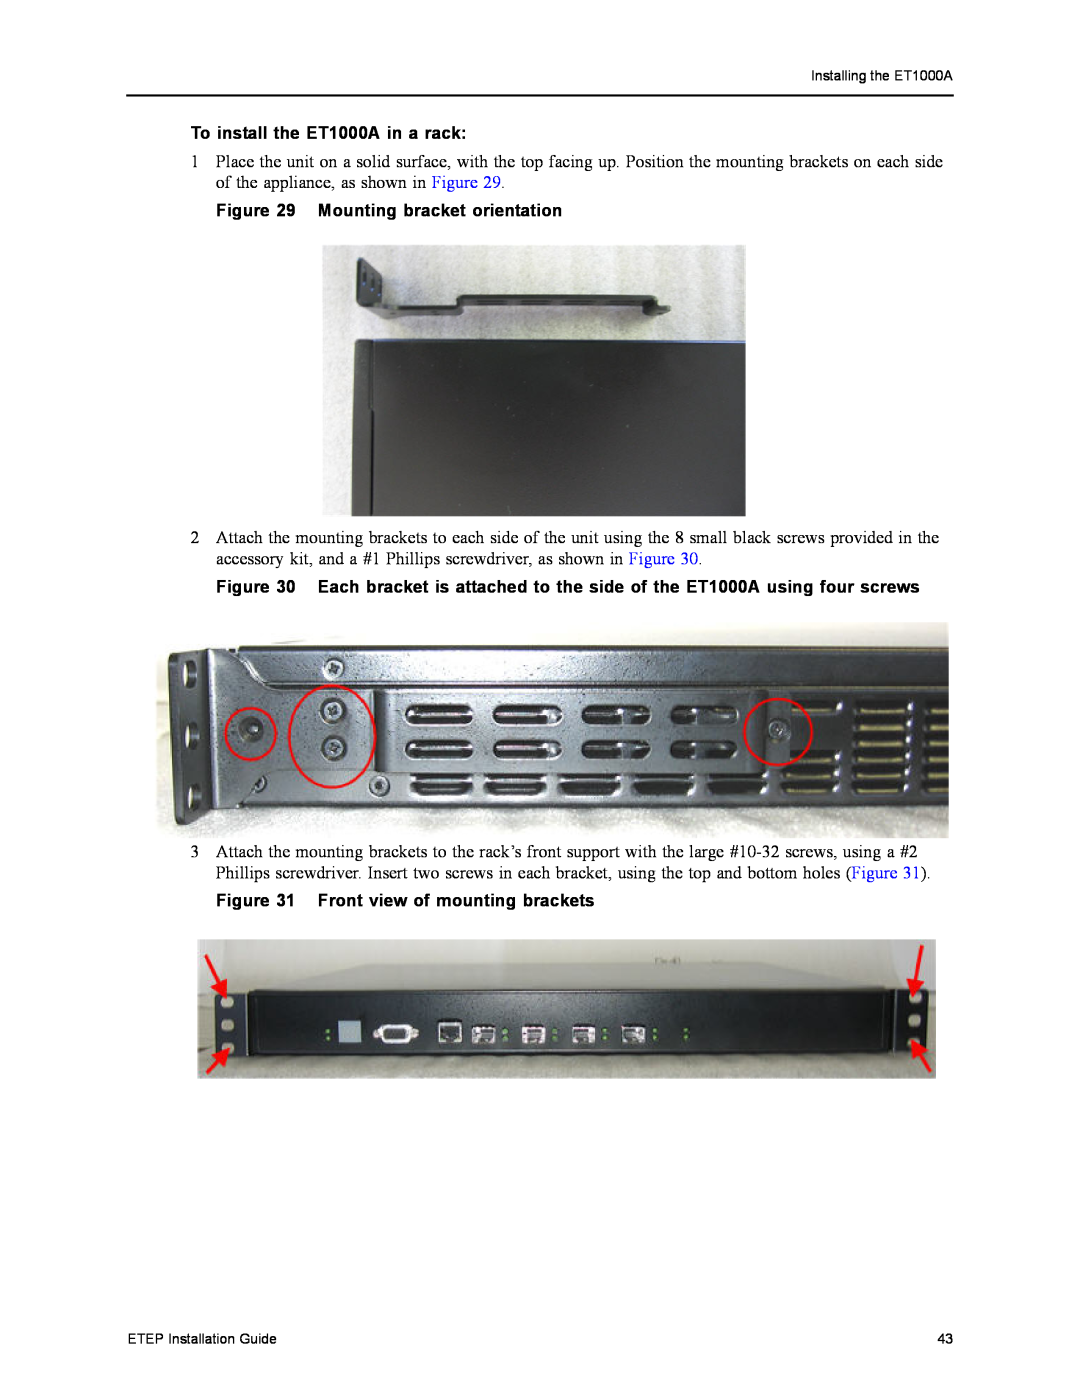 Black Box ET10000A manual To install the ET1000A in a rack, Mounting bracket orientation, Front view of mounting brackets 